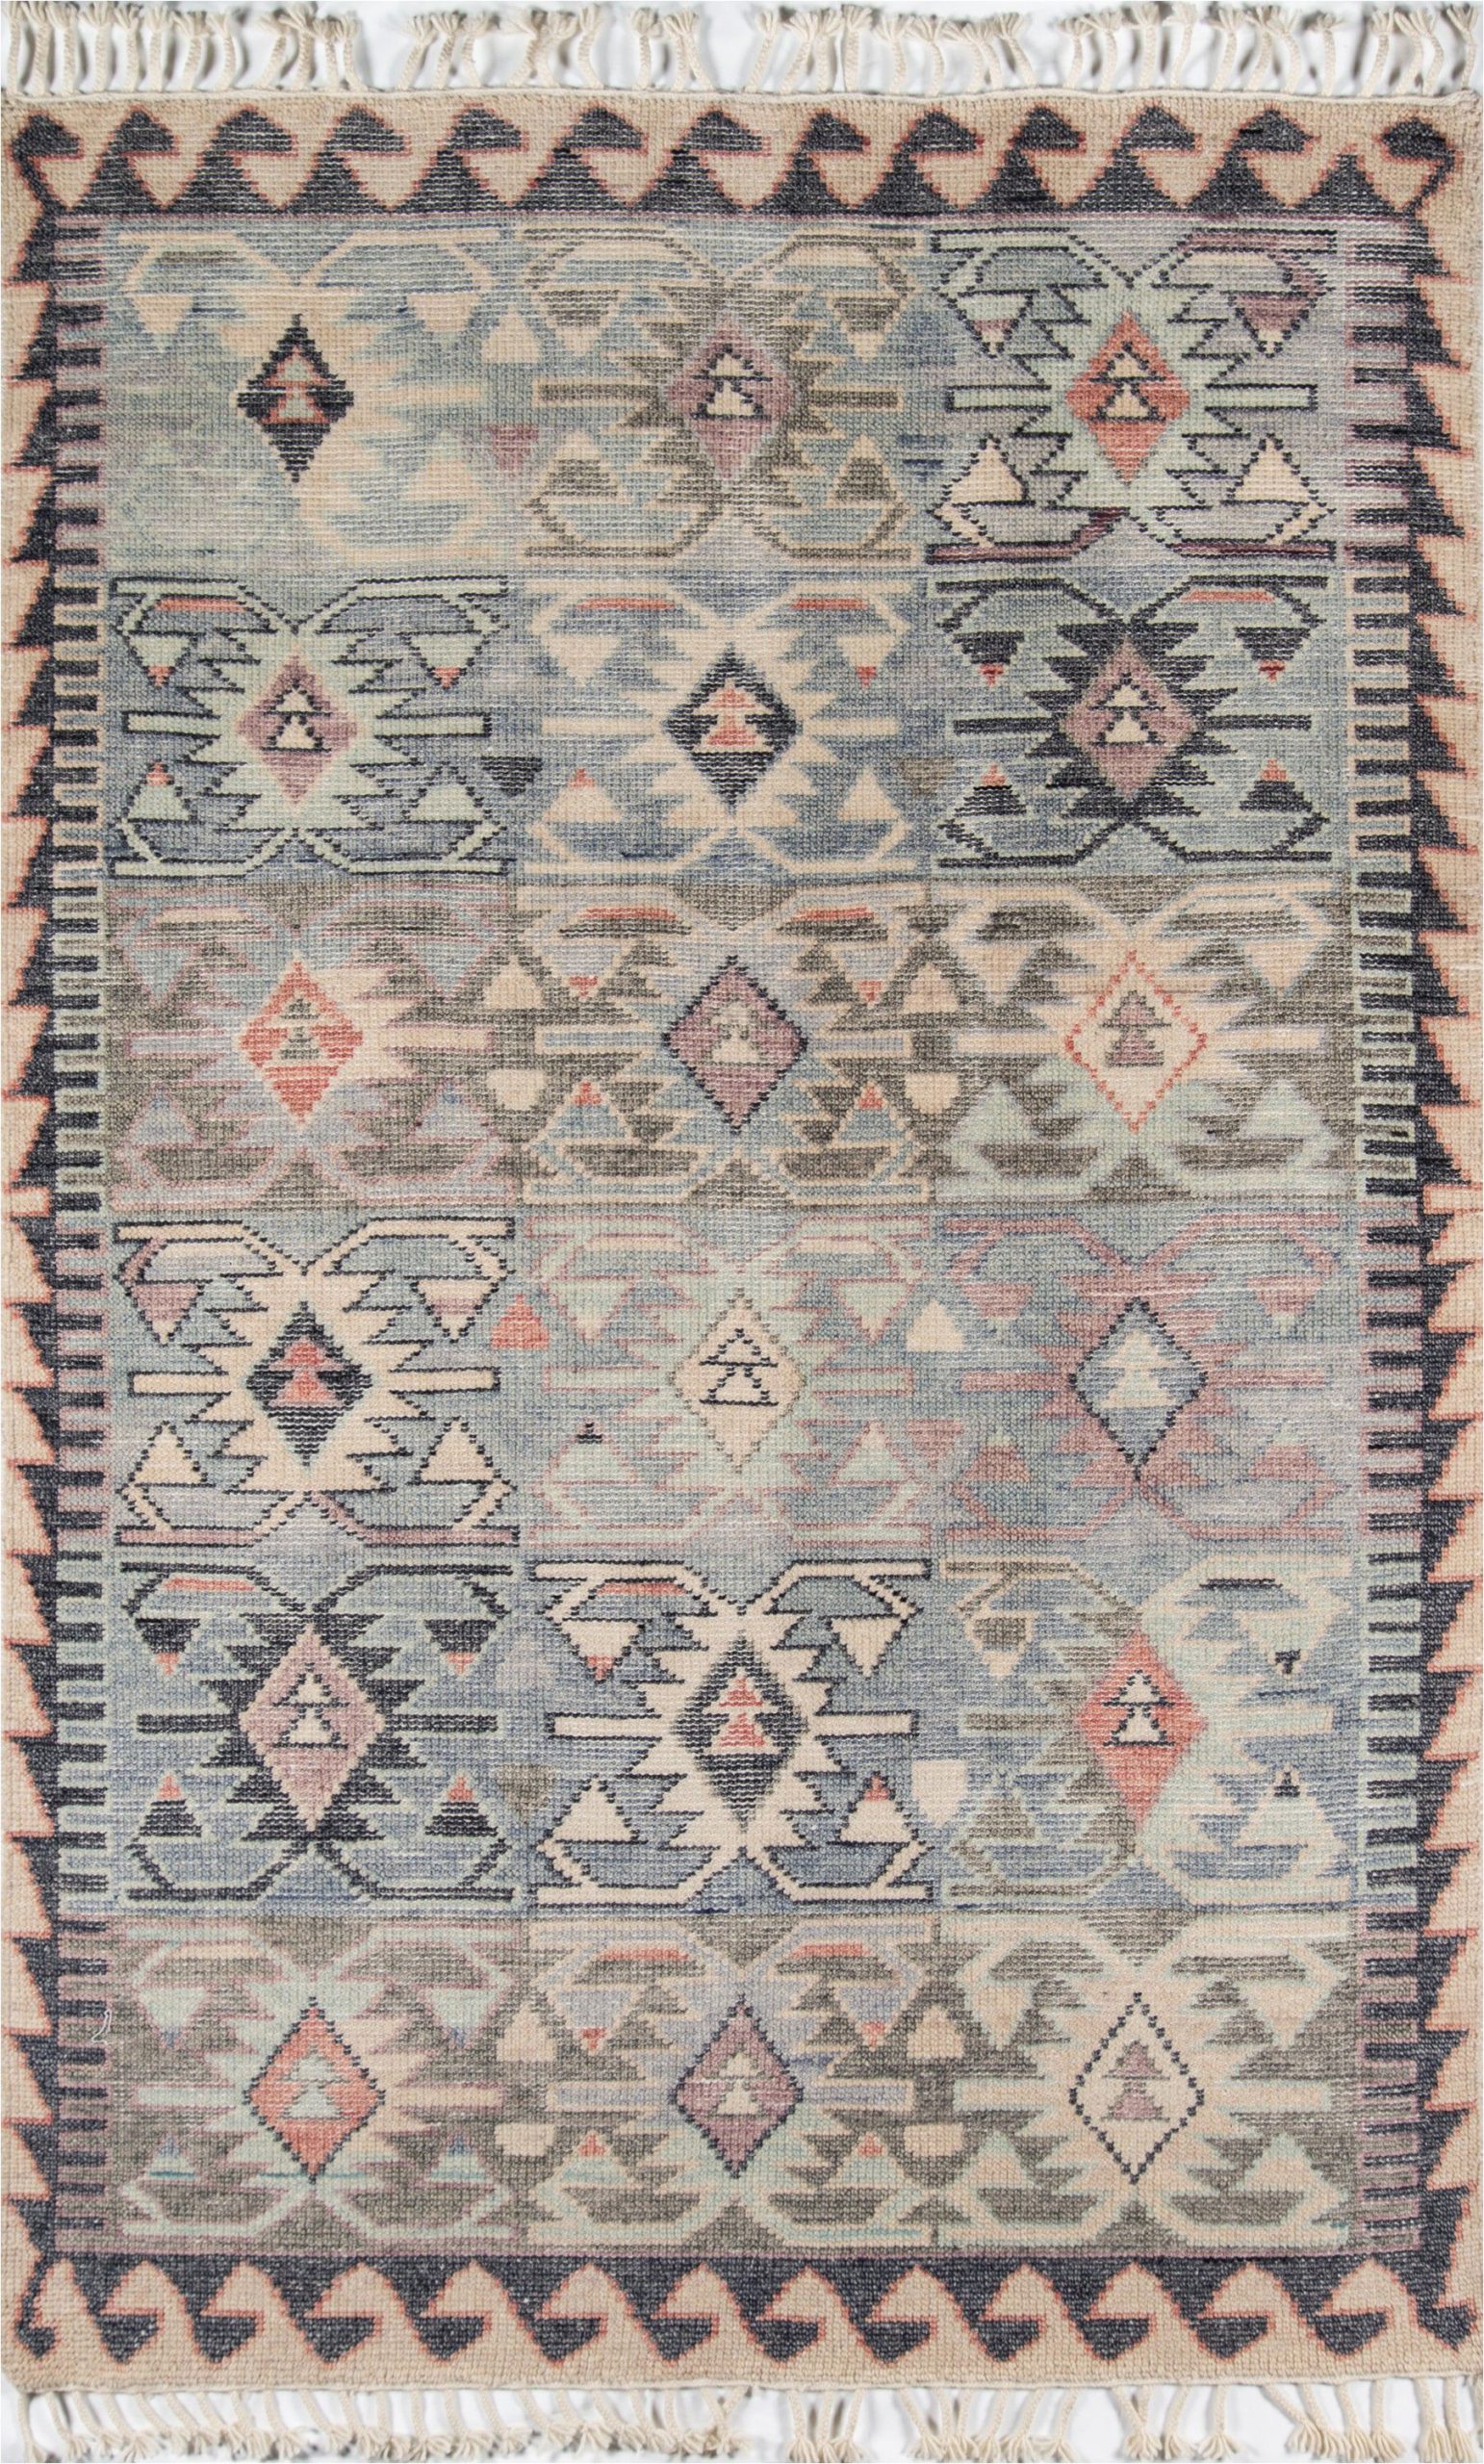 Finn Hand Knotted Rug Blue Multi Bring some Fun Colorful Life Into Your Space with the Agape